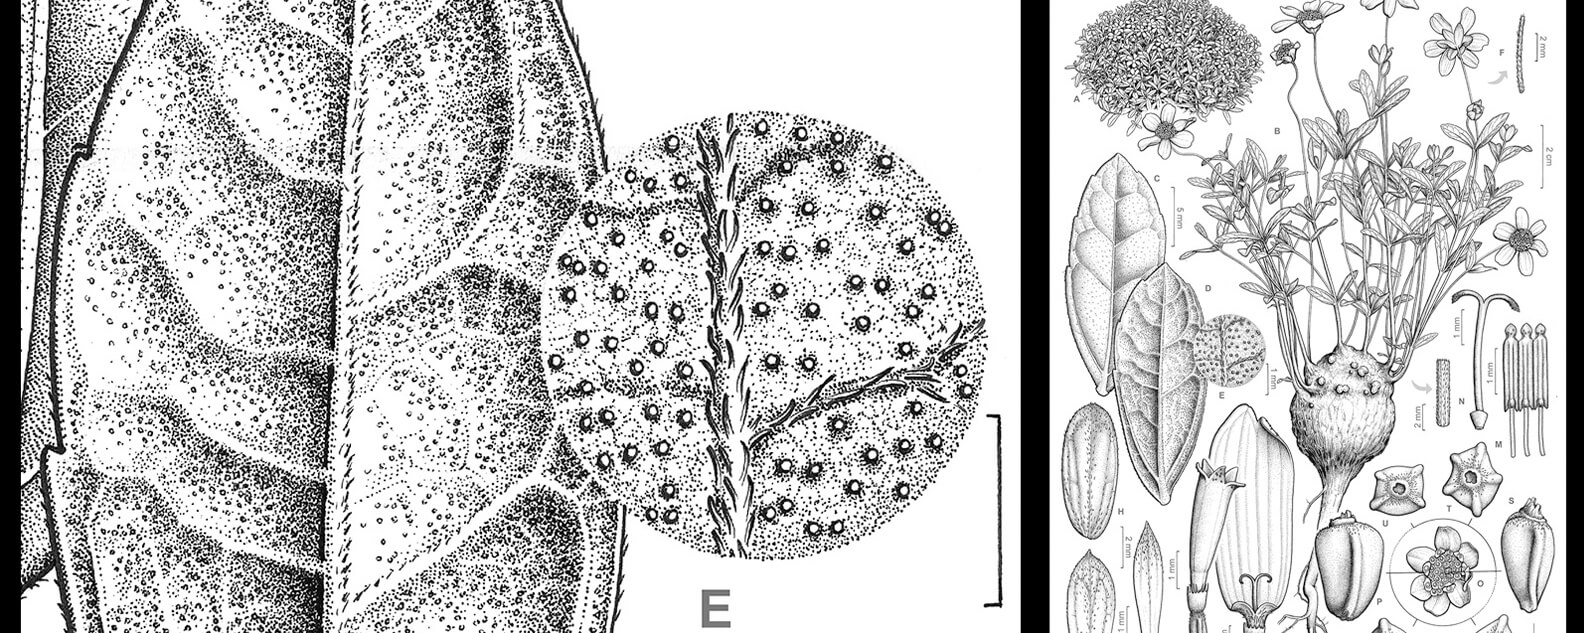 Detailed scientific illustration in black and white of Wedelia sp. nov. by Gustavo Surlo